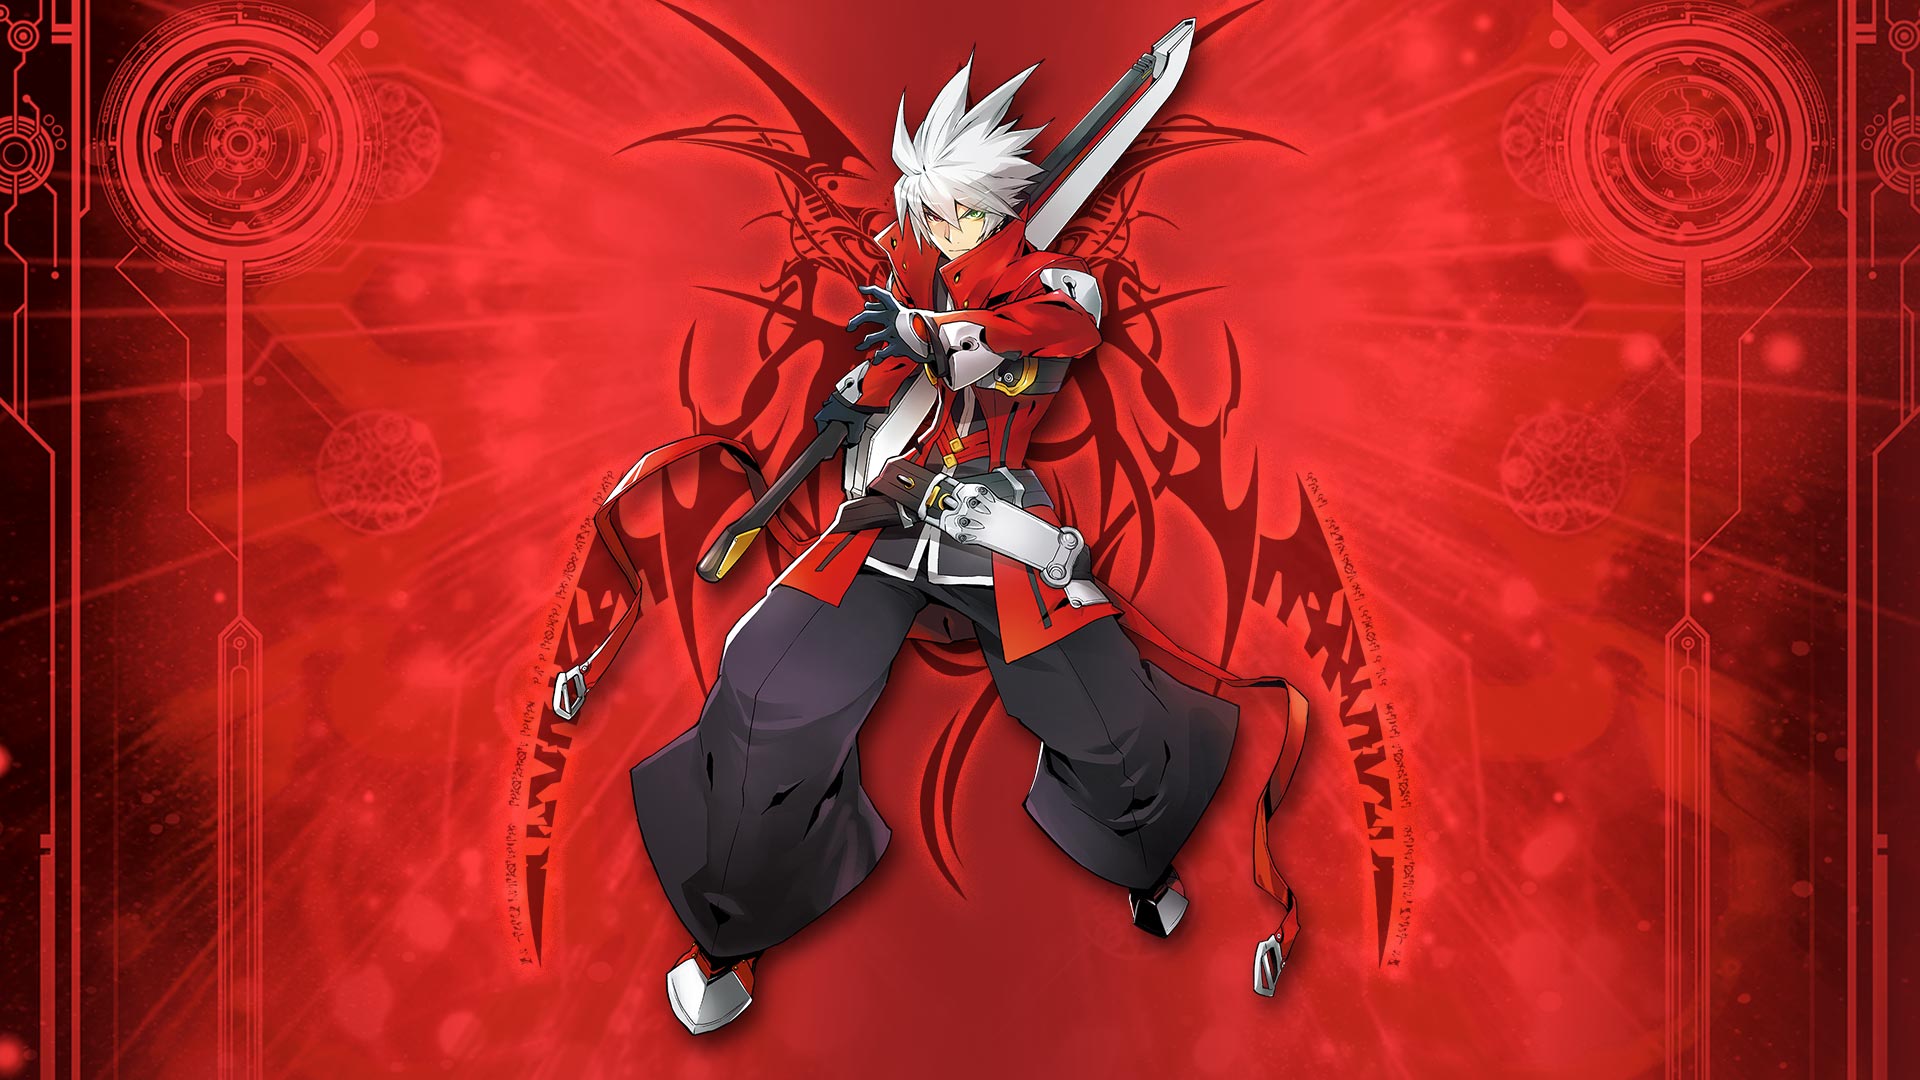 Video Game BlazBlue Centralfiction HD Wallpaper | Background Image